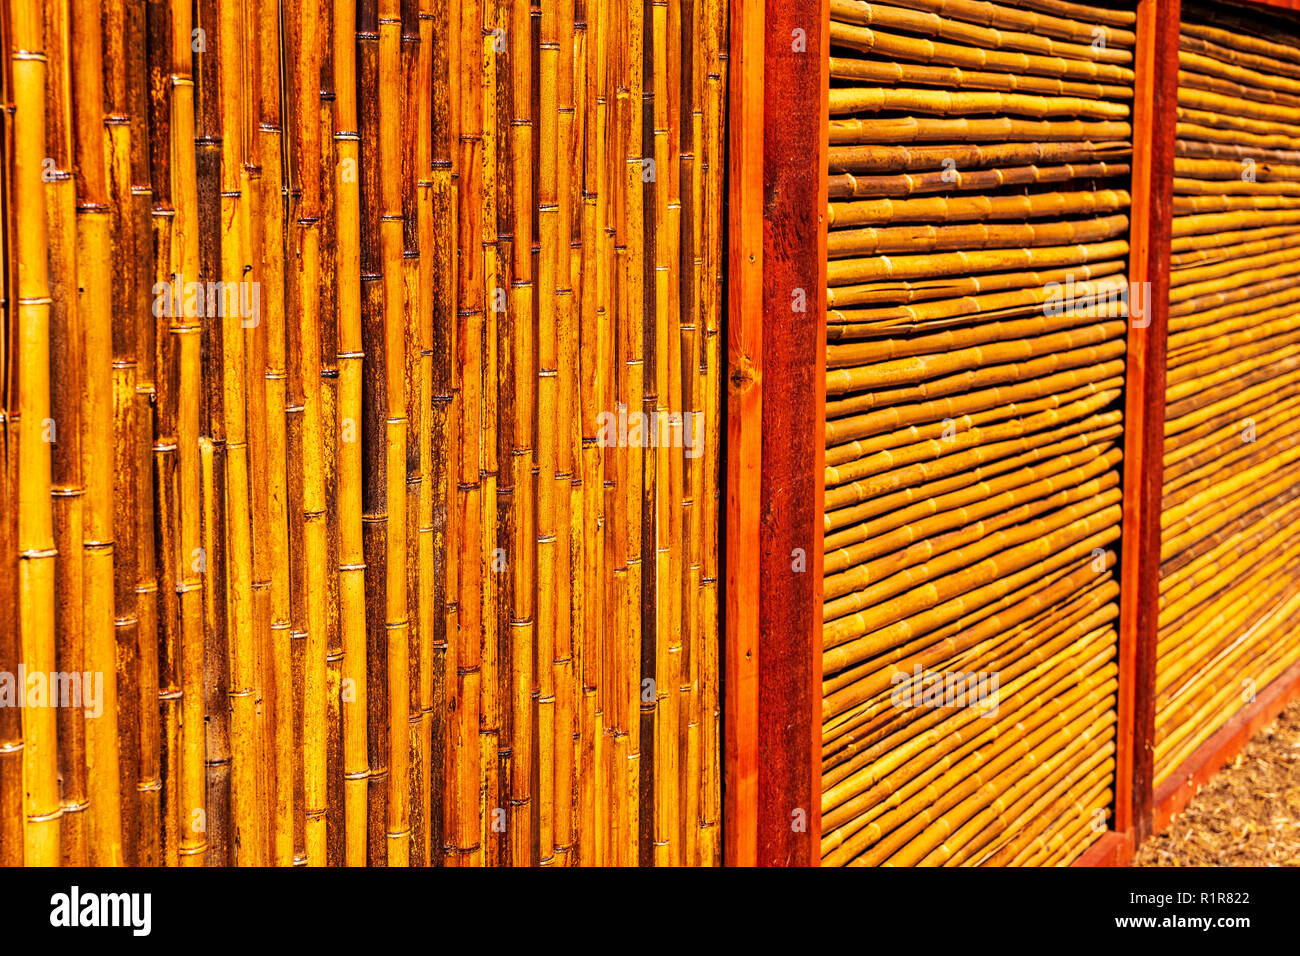 Bamboo fence creates graphic patterns Stock Photo